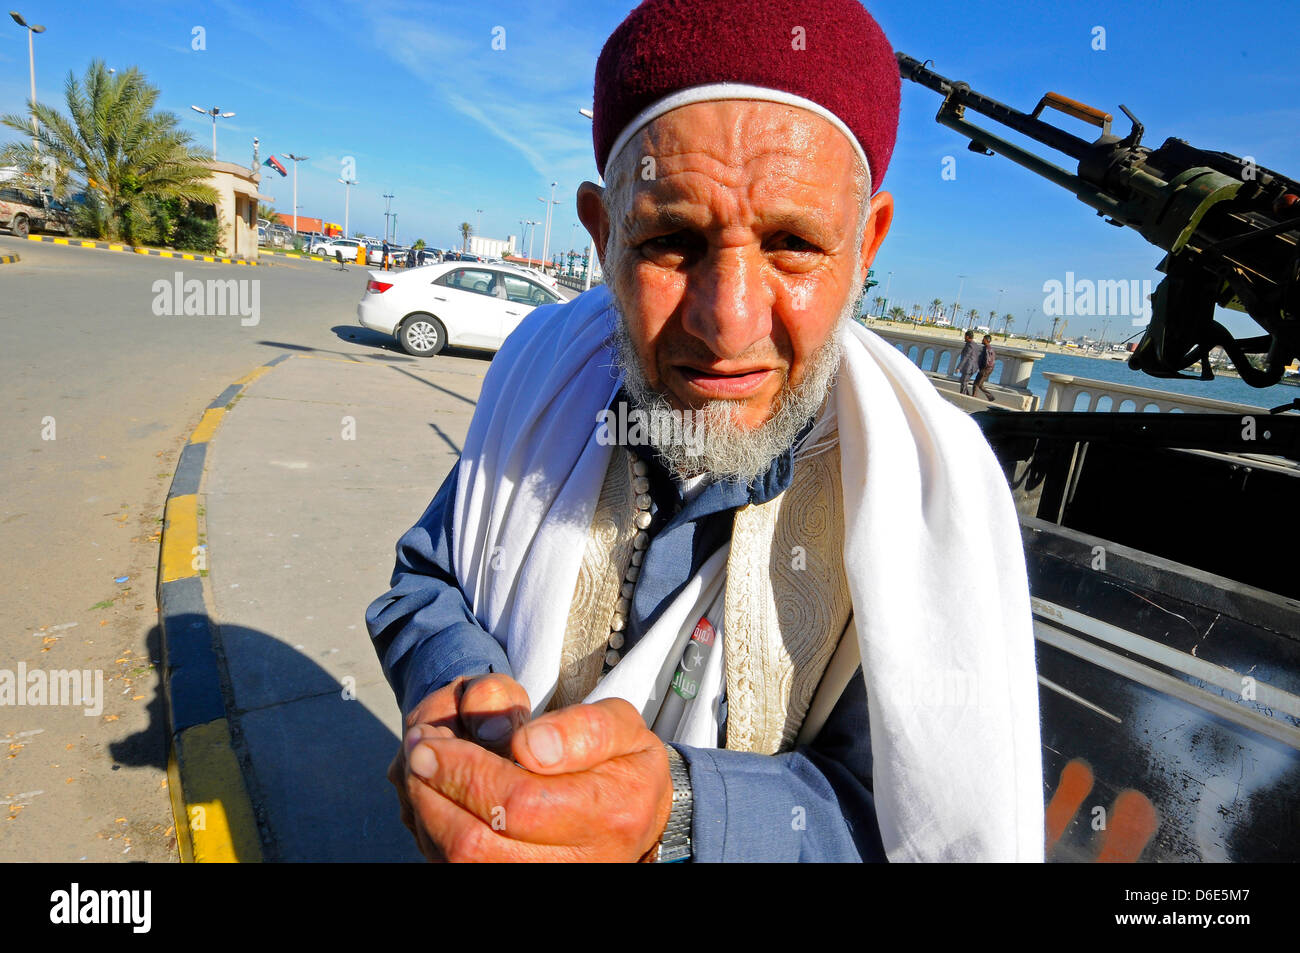 An elderly man stands next to vehicle with a mounted makeshift gun on a street in Tripoli, Libya, 17 December 2011. Local residents and civilians are making regular tours to the rebels in the Libyan capital of Tripoli to show their respect. Photo: Matthias Toedt Stock Photo